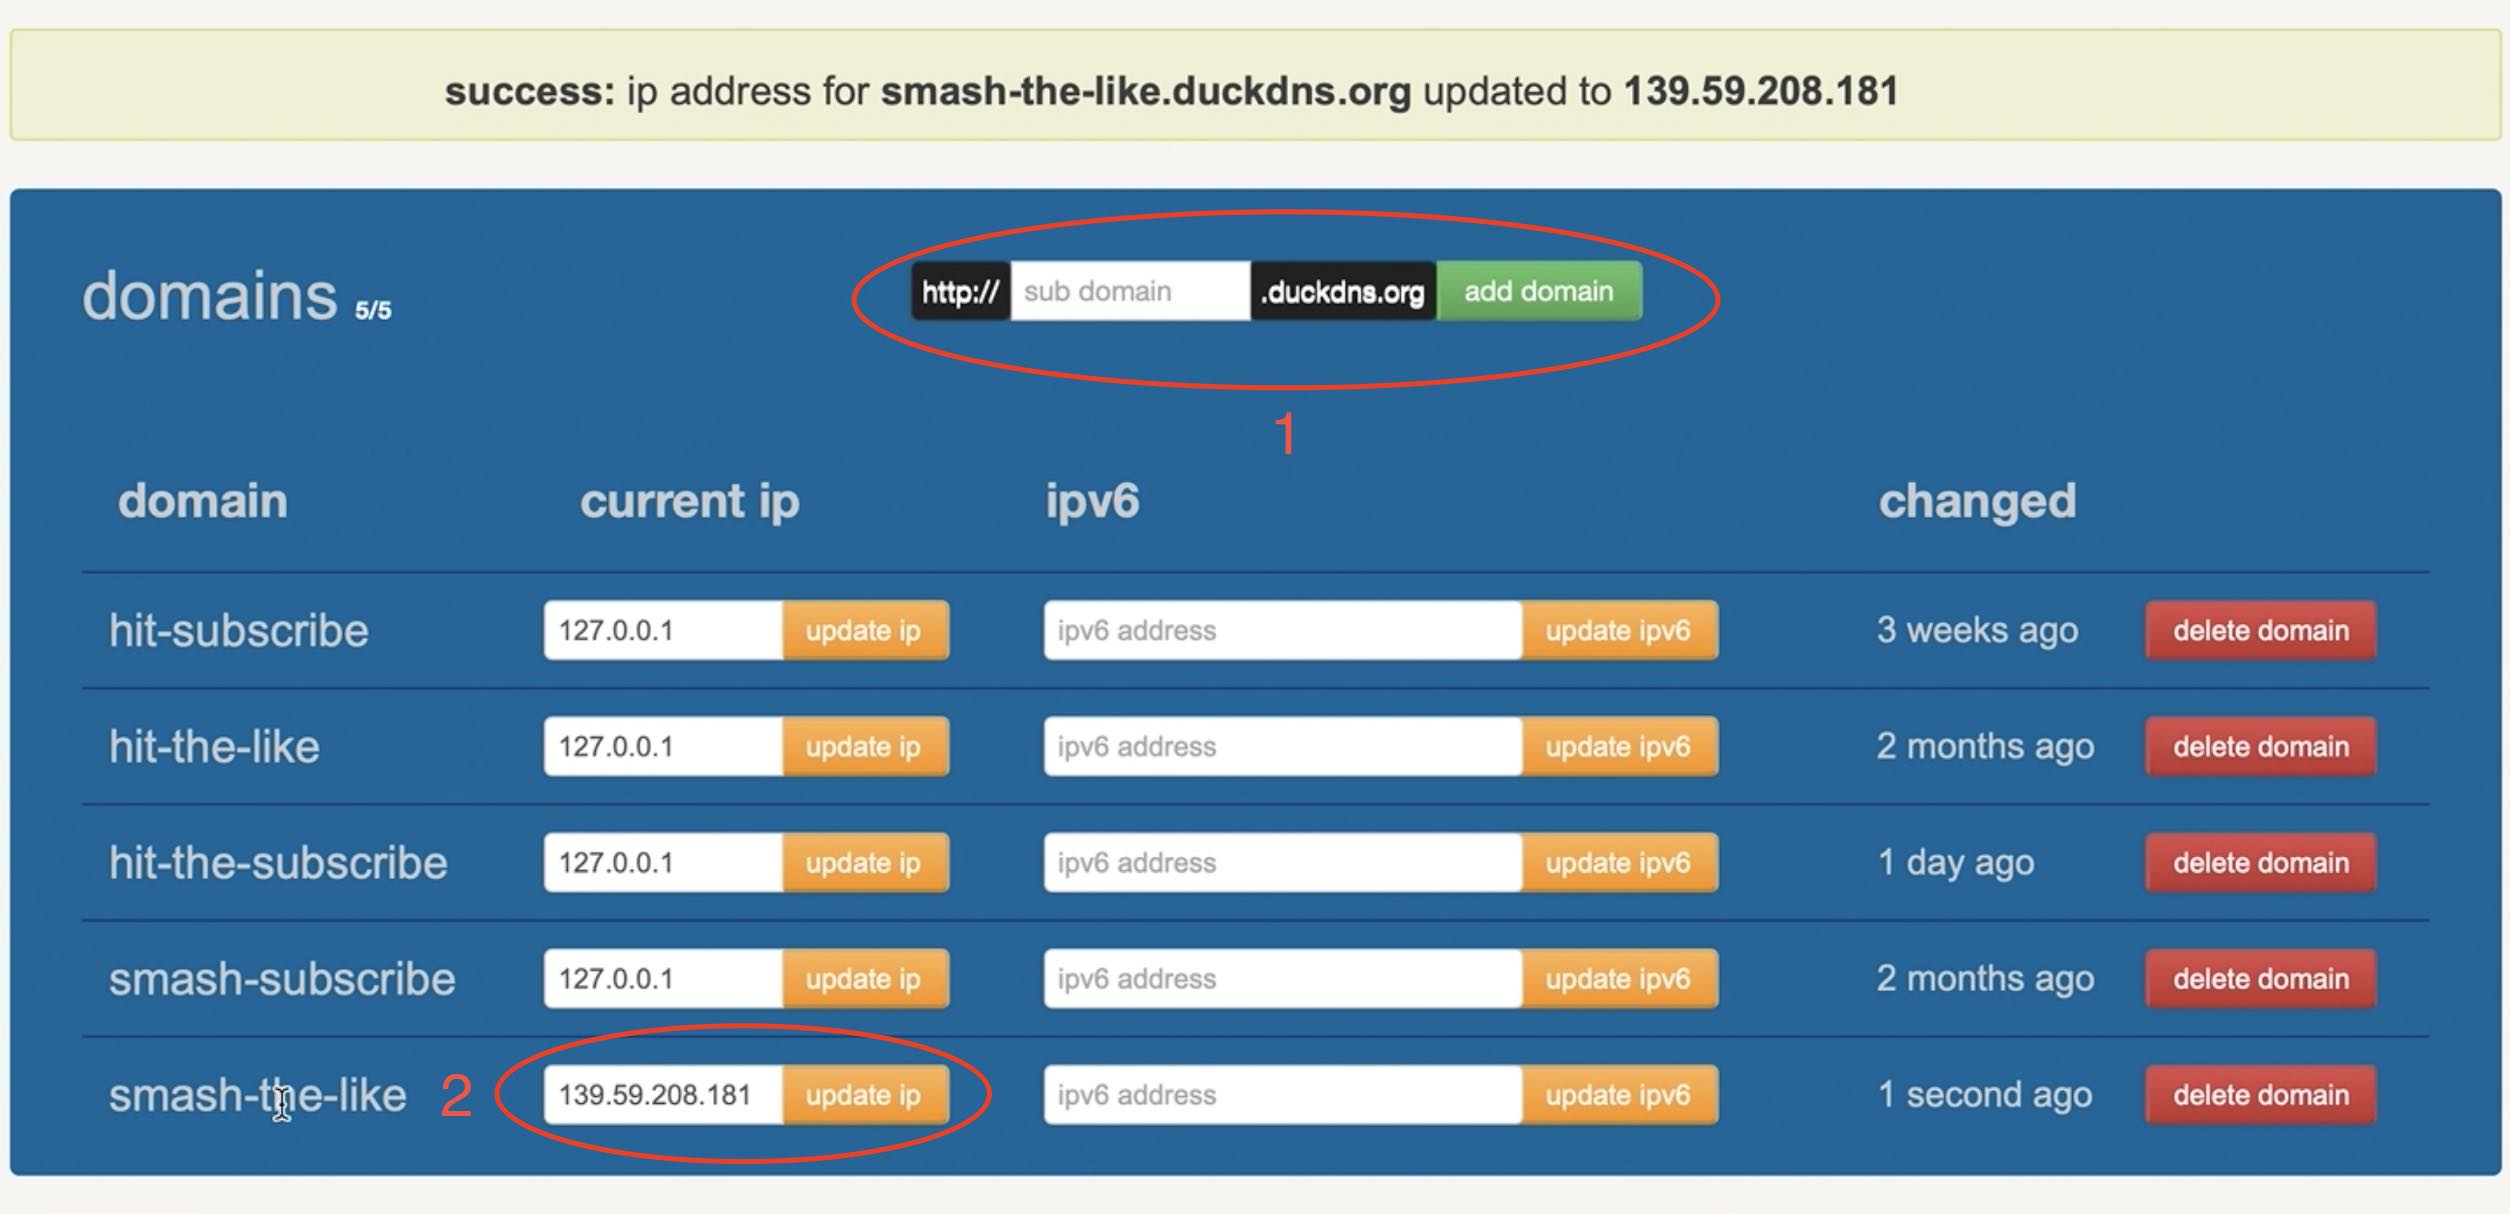 Adding a new domain in DuckDNS website and update the IP of the domain with the DigitalOcean droplet IP